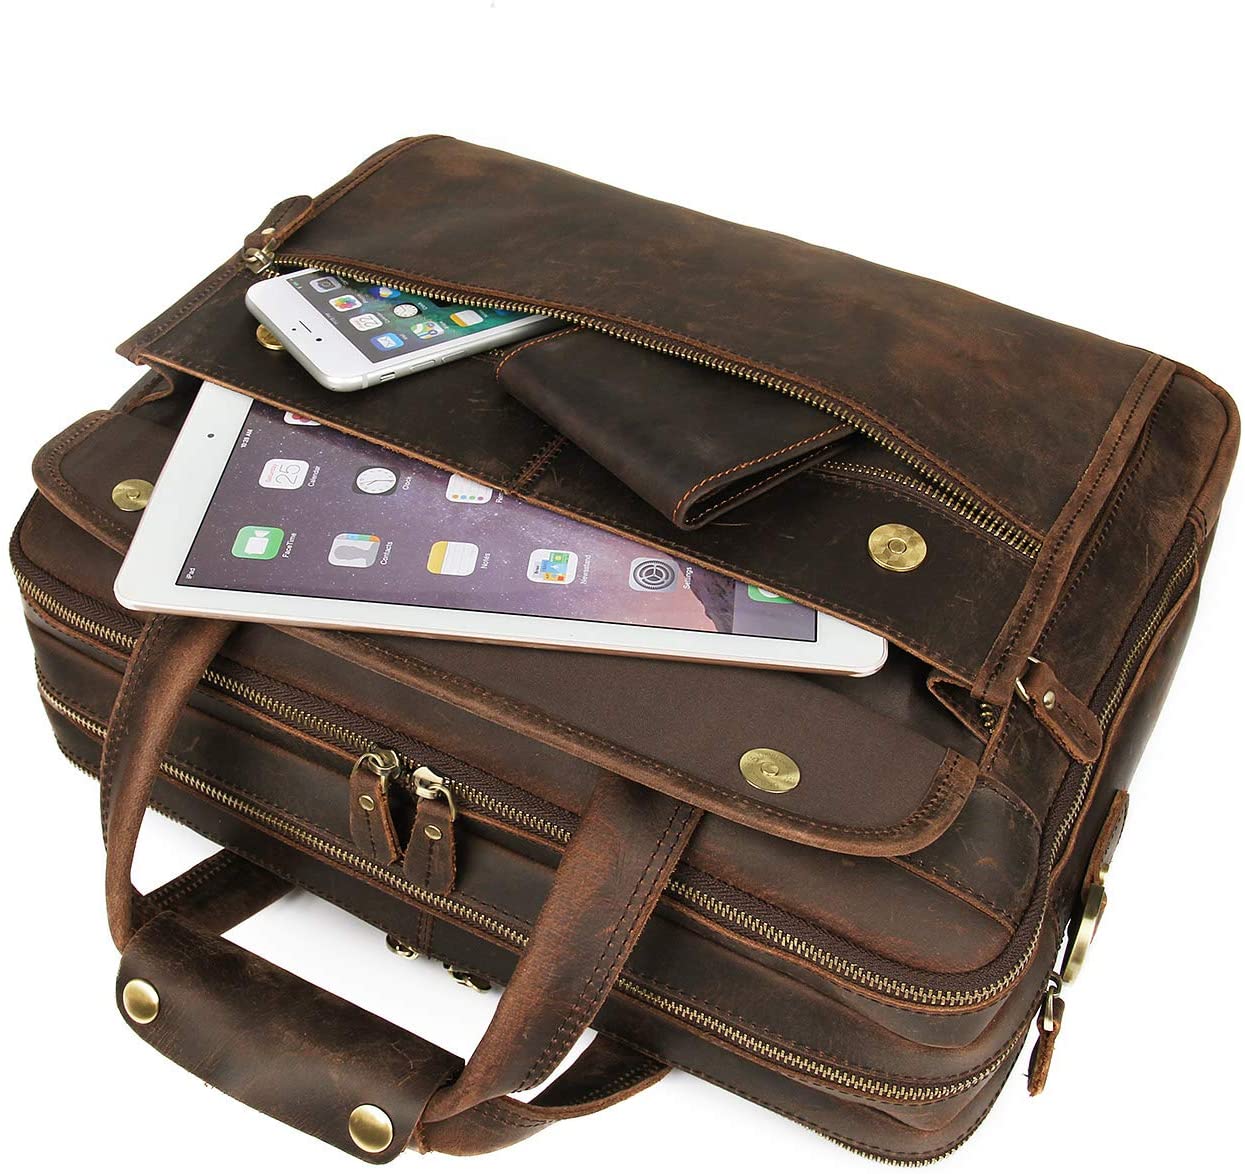 Buffalo Leather Briefcase for Men Business Travel Messenger Bags 